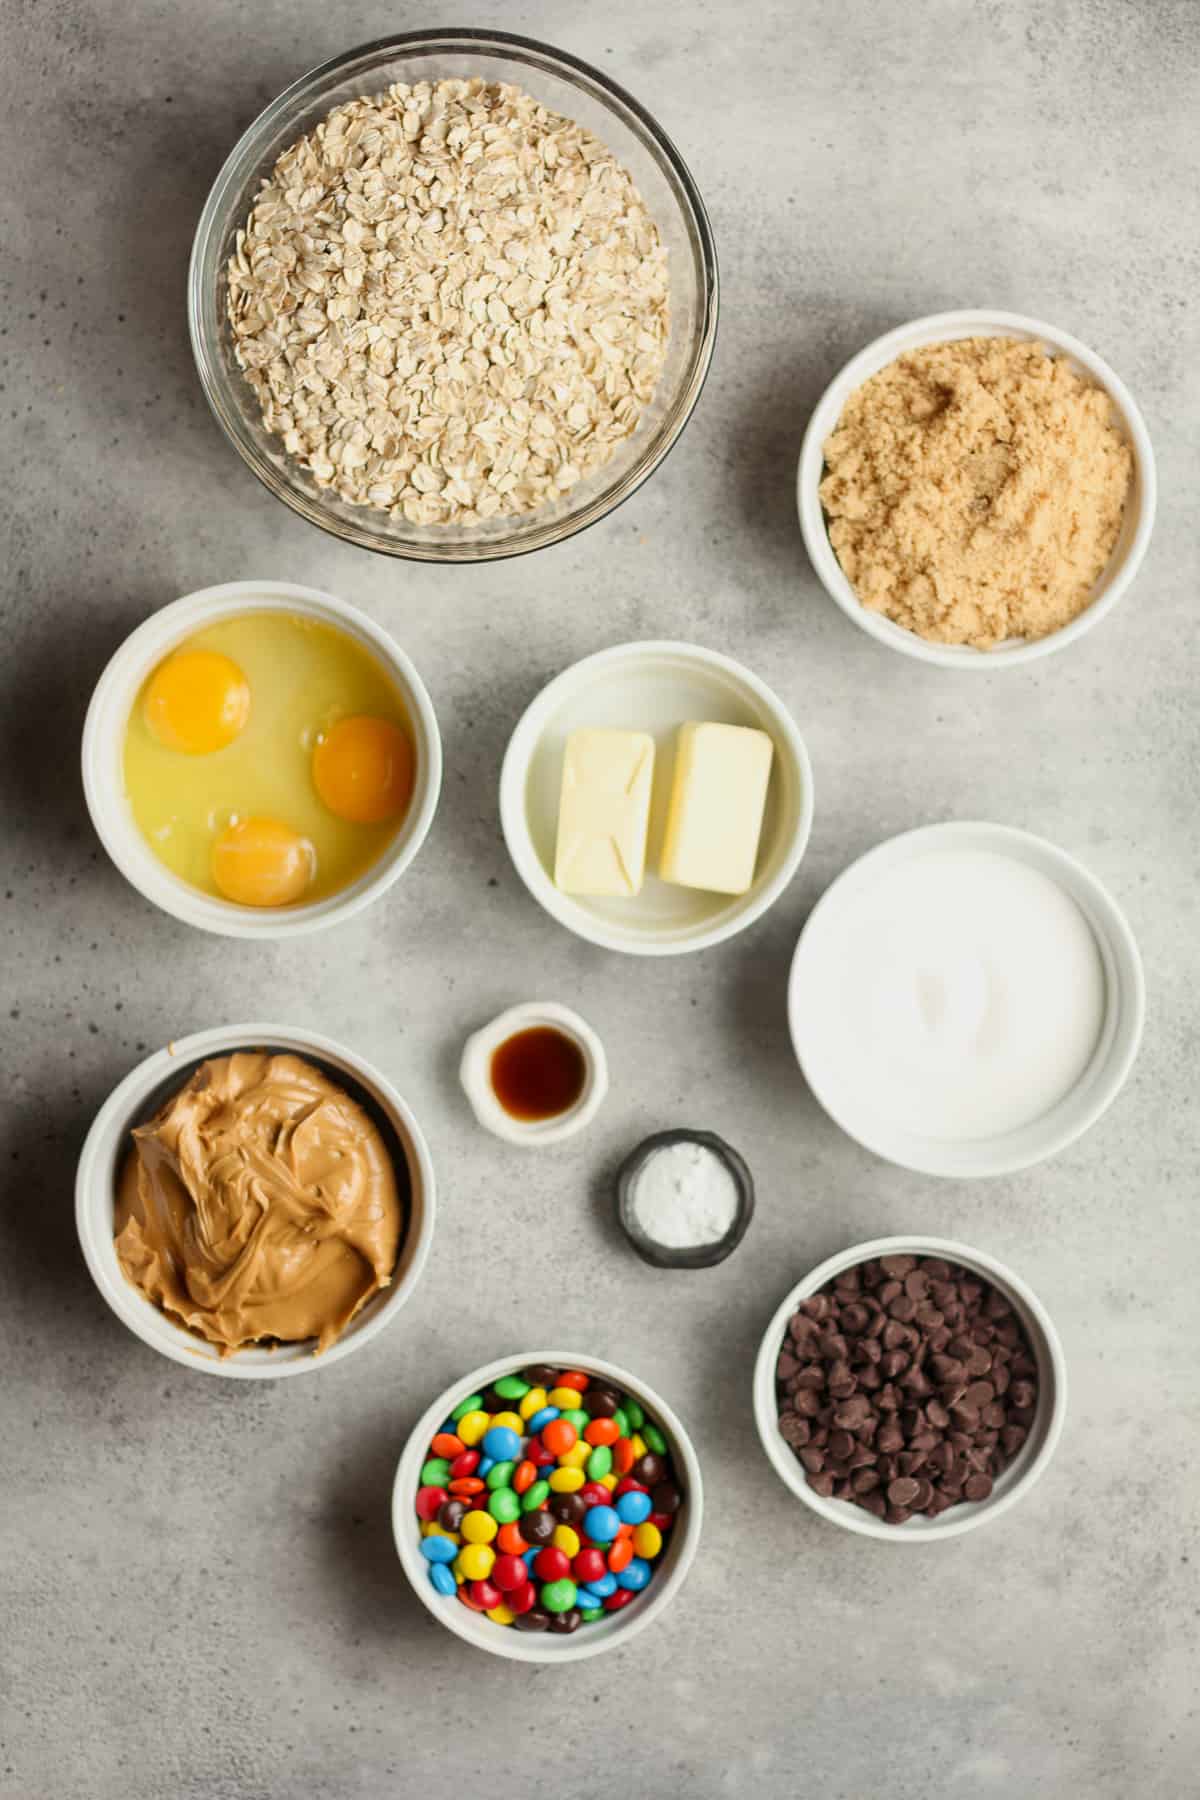 Bowls of the ingredients for the monster cookies.